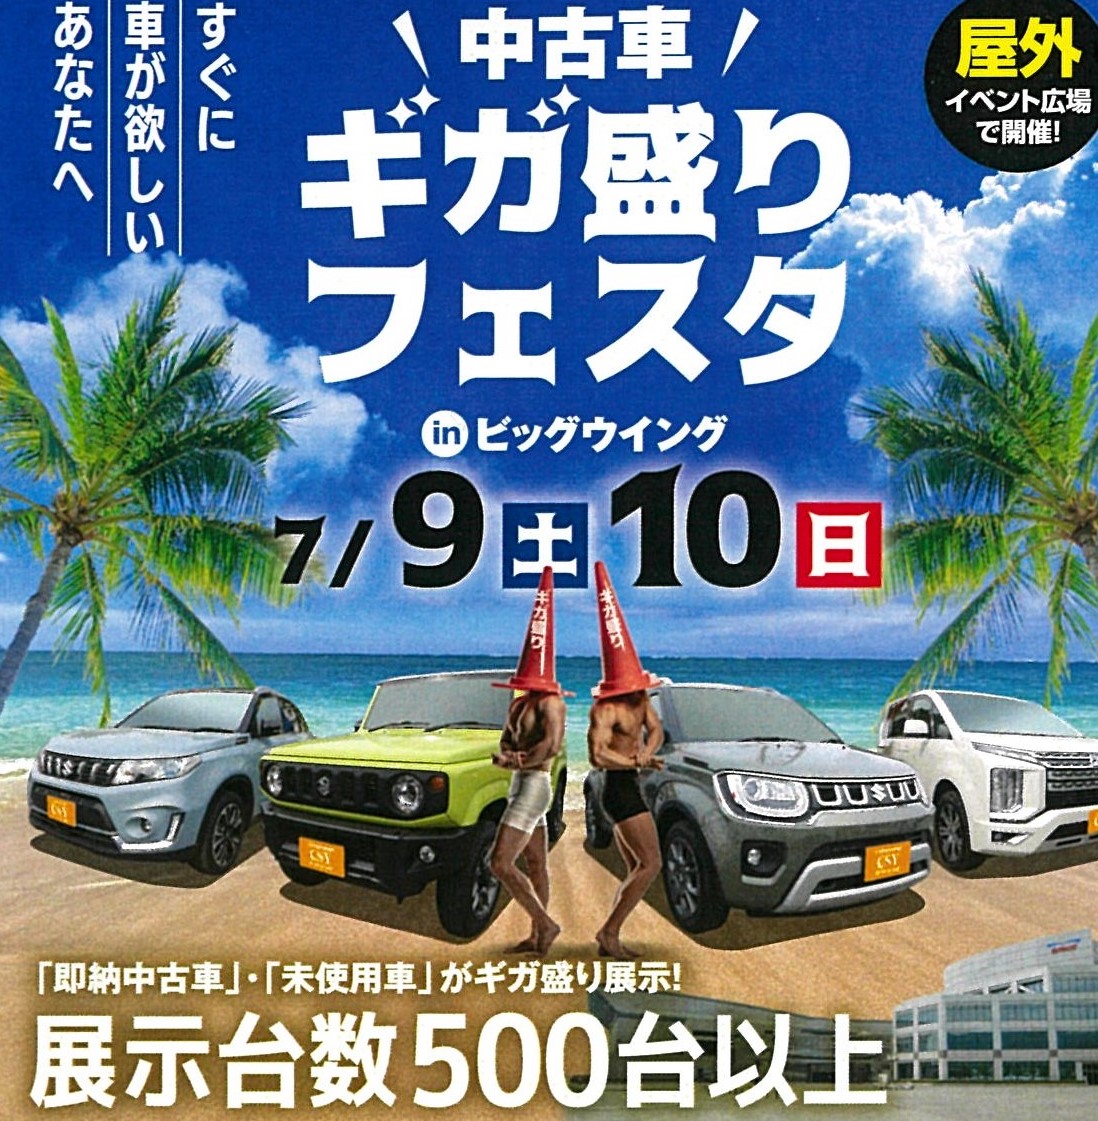 You are currently viewing 週末は中古車ギガ盛りフェスタへ！